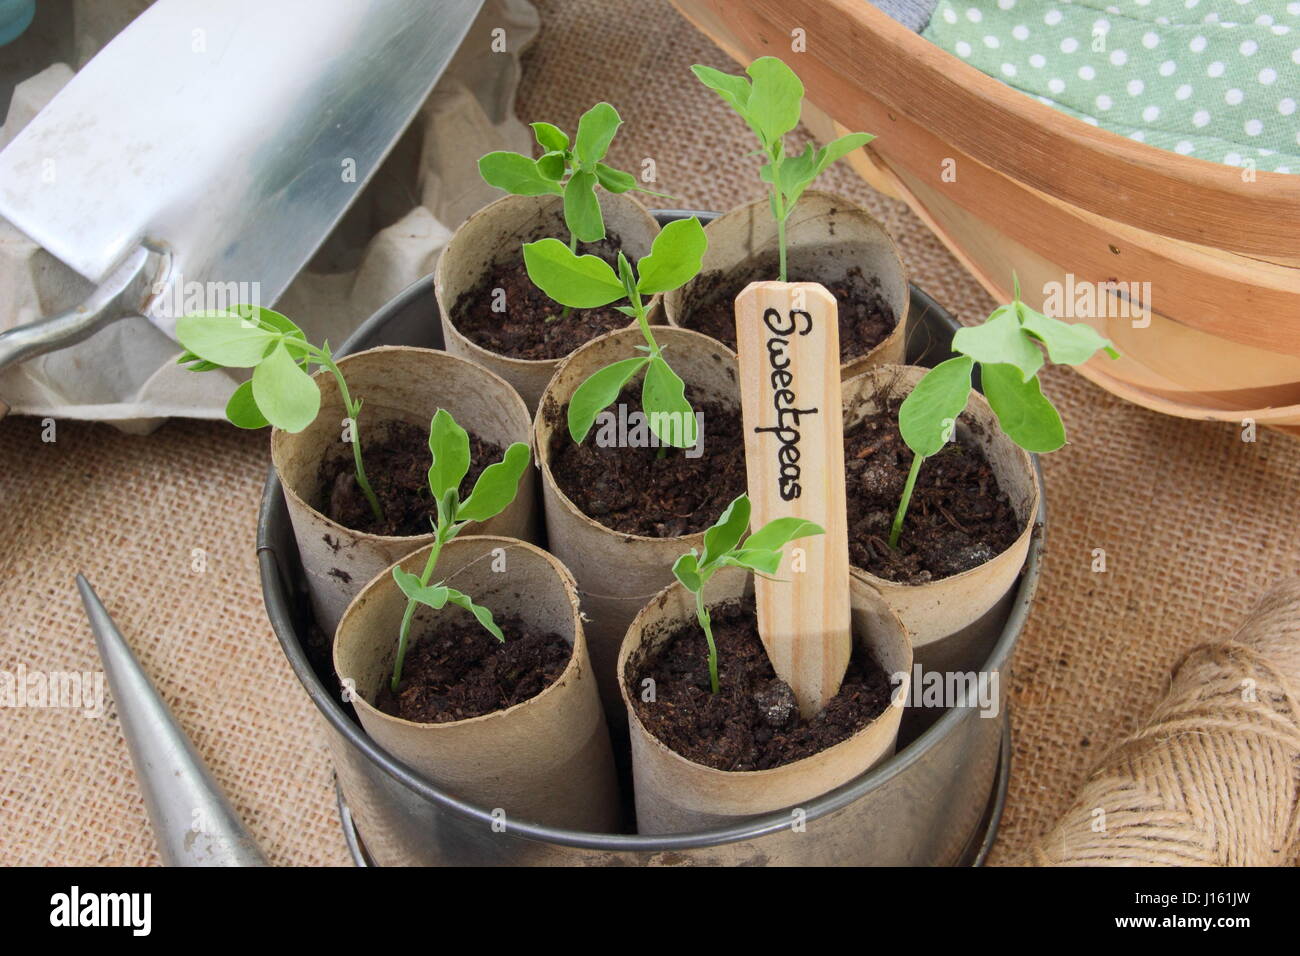 Young lathyrus 'Spencer' sweet peas sown in recycled toilet roll inners, grown on warm windowsill in vintage cake tin container ready for planting out Stock Photo